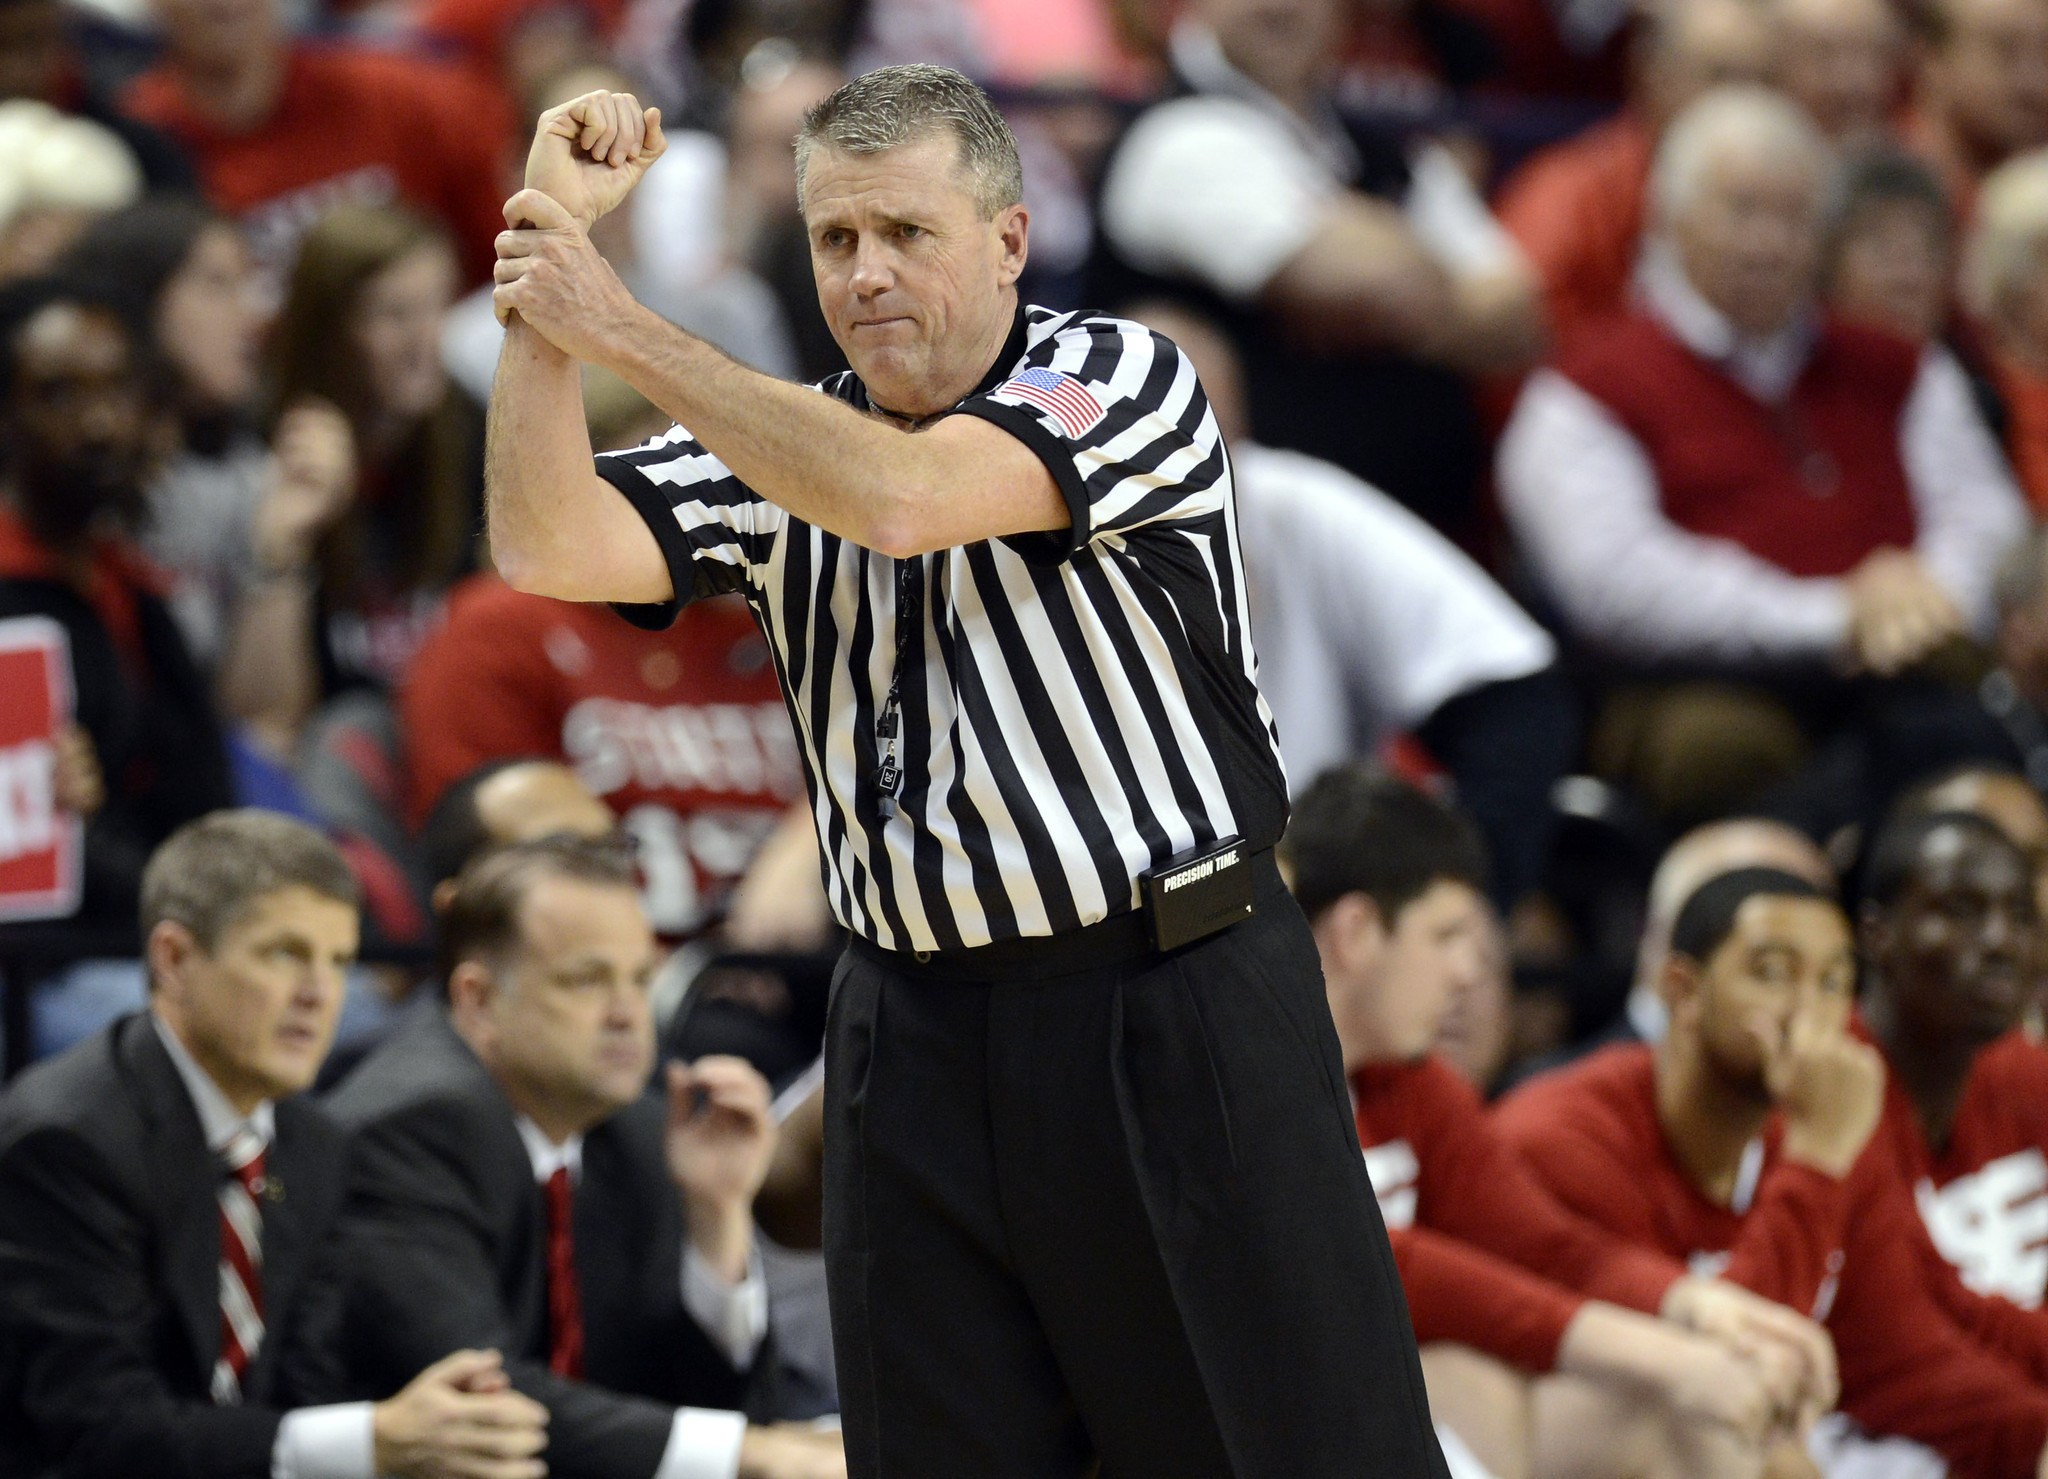 Bryan Kersey earns first Final Four officiating assignment - Daily Press